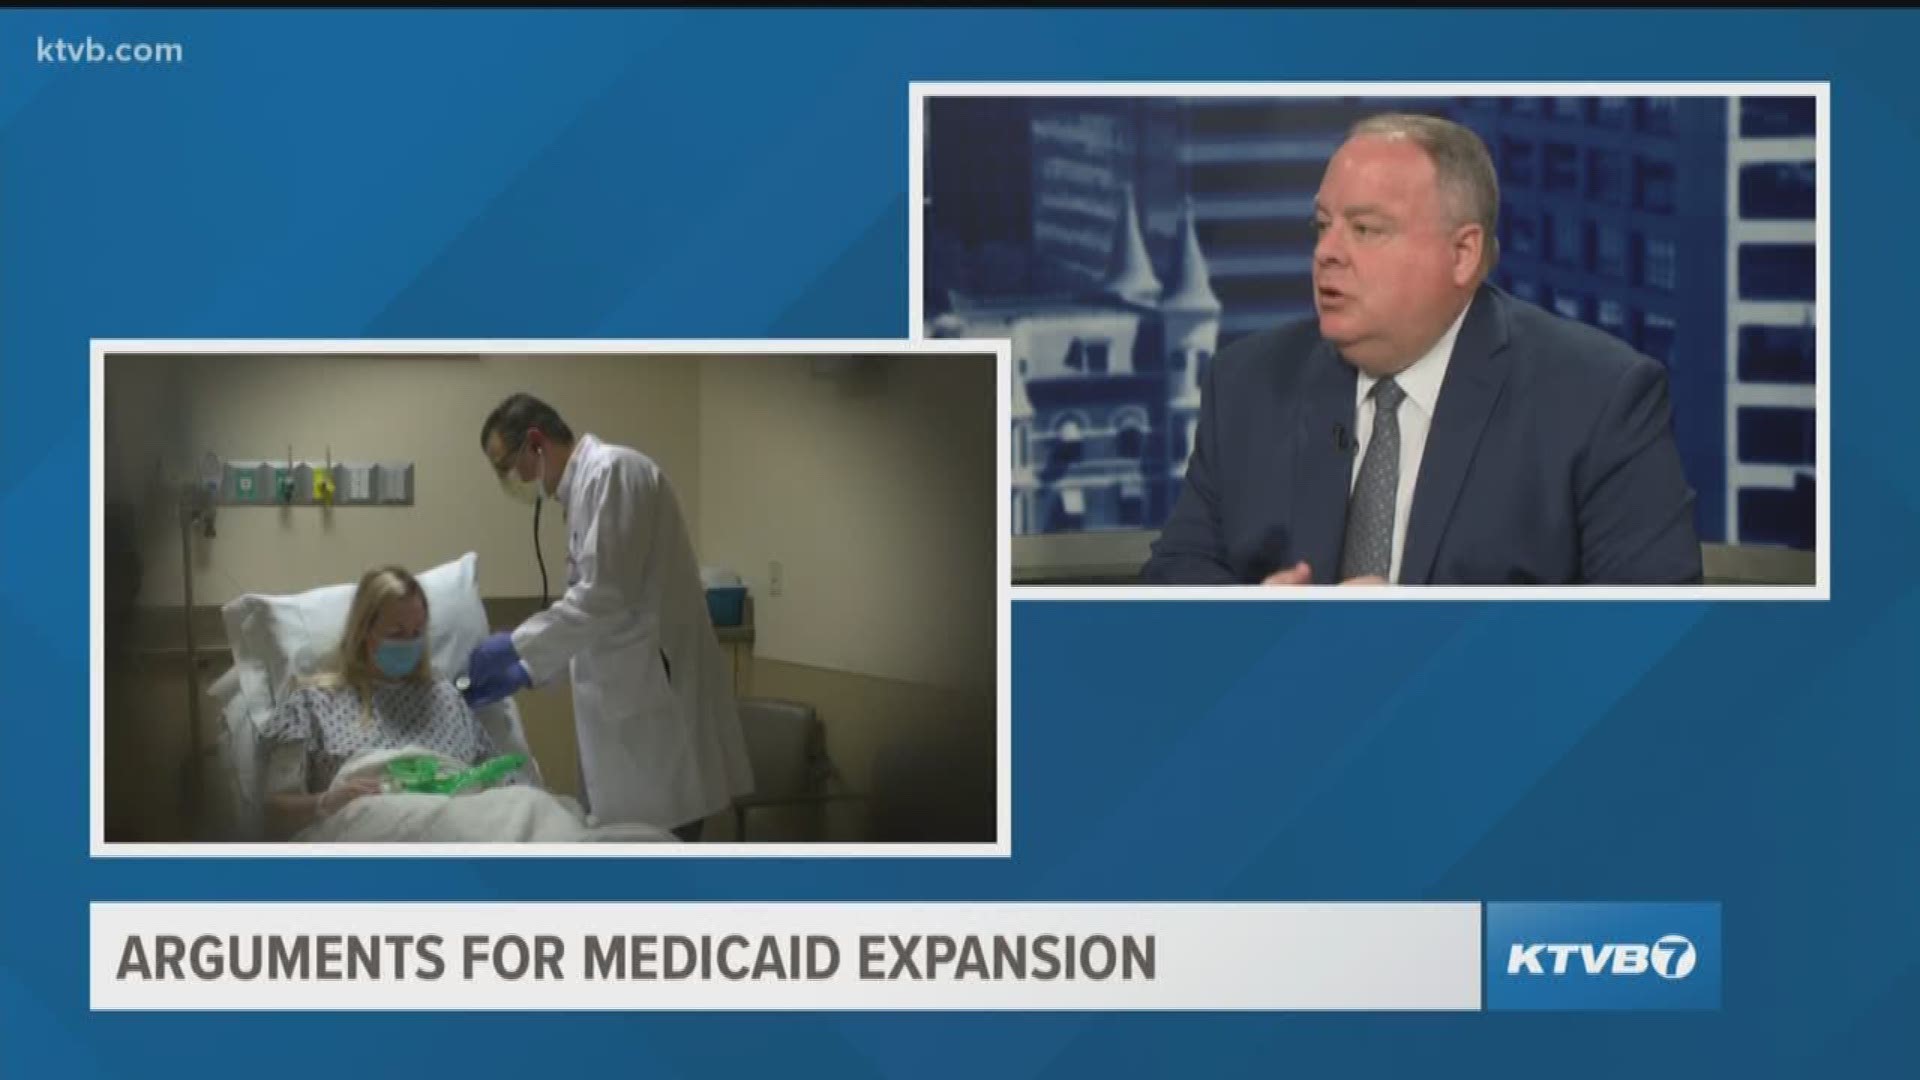 Viewpoint: The arguments for and against Medicaid expansion